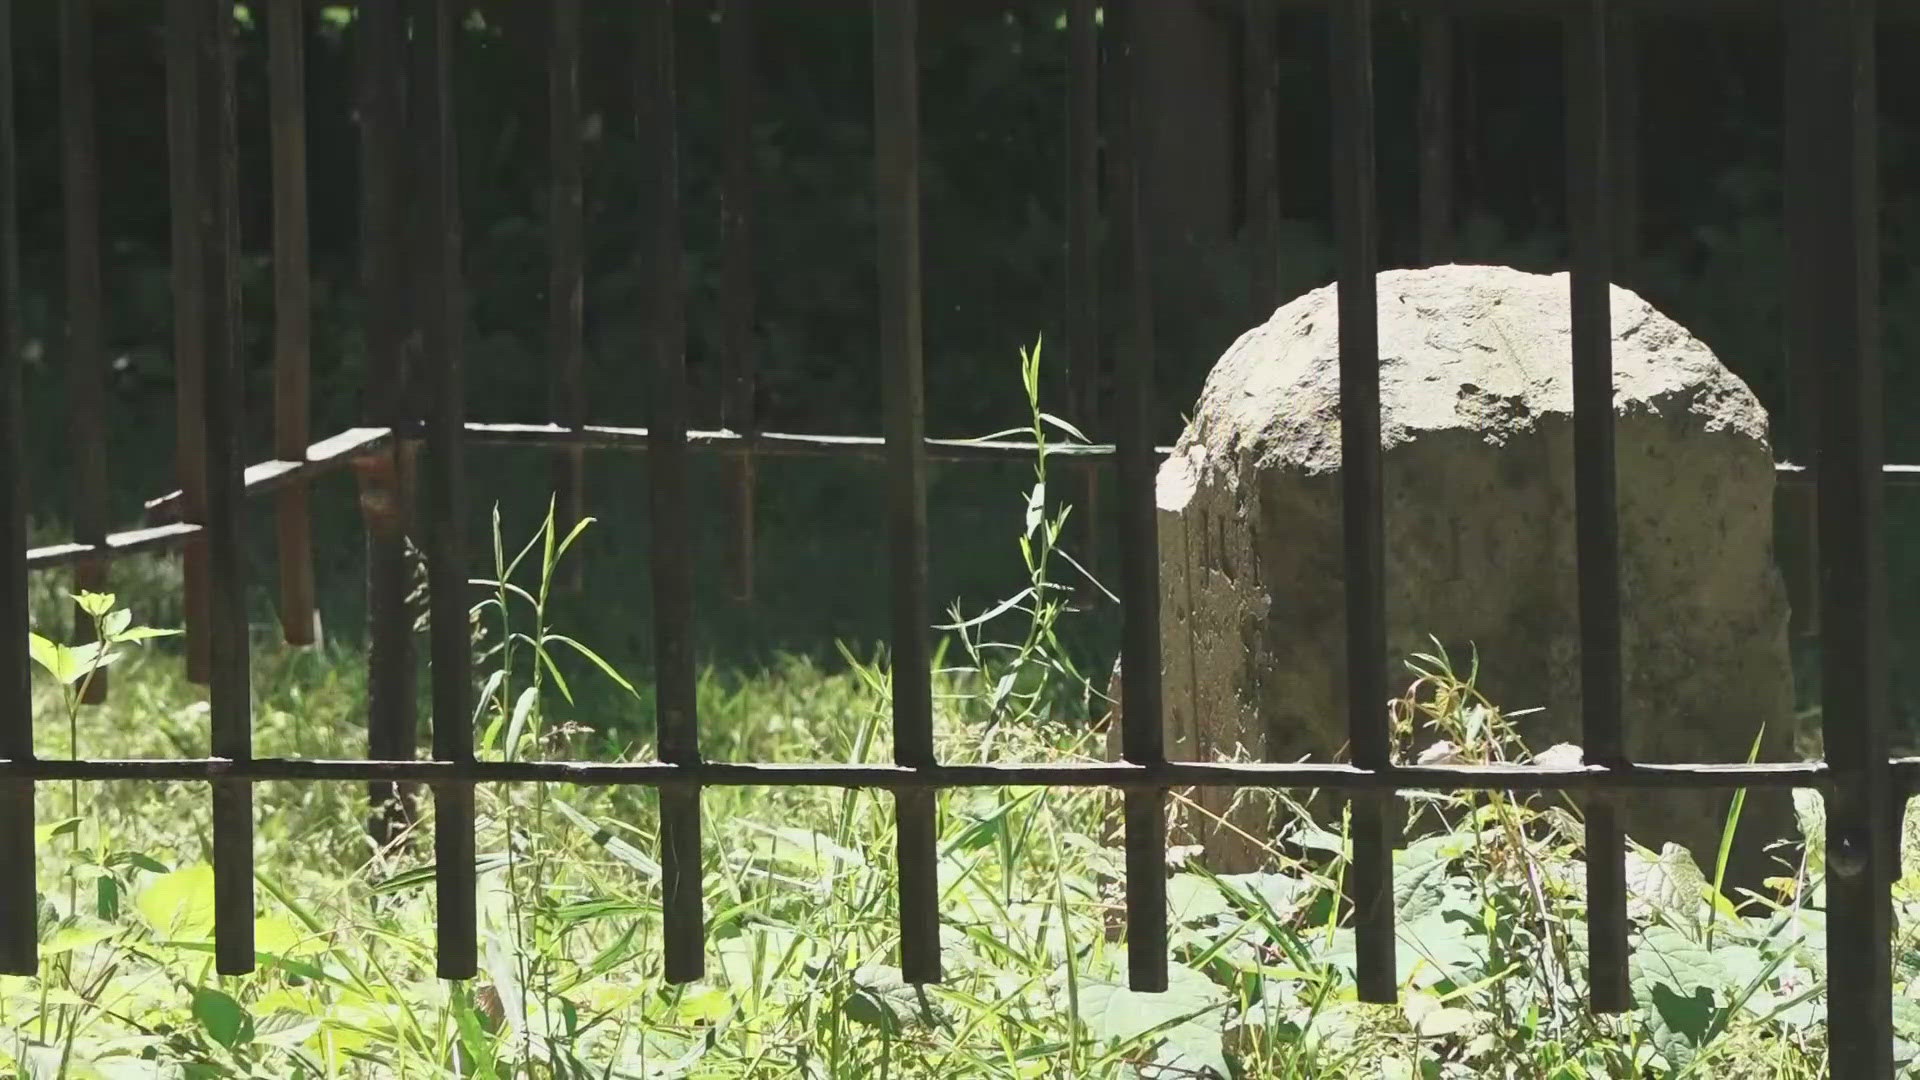 Stephen Powers of the Nation's Capital Boundary Stones Committee was able to rescue one of the boundary stones after its fence was damaged by a car crash.